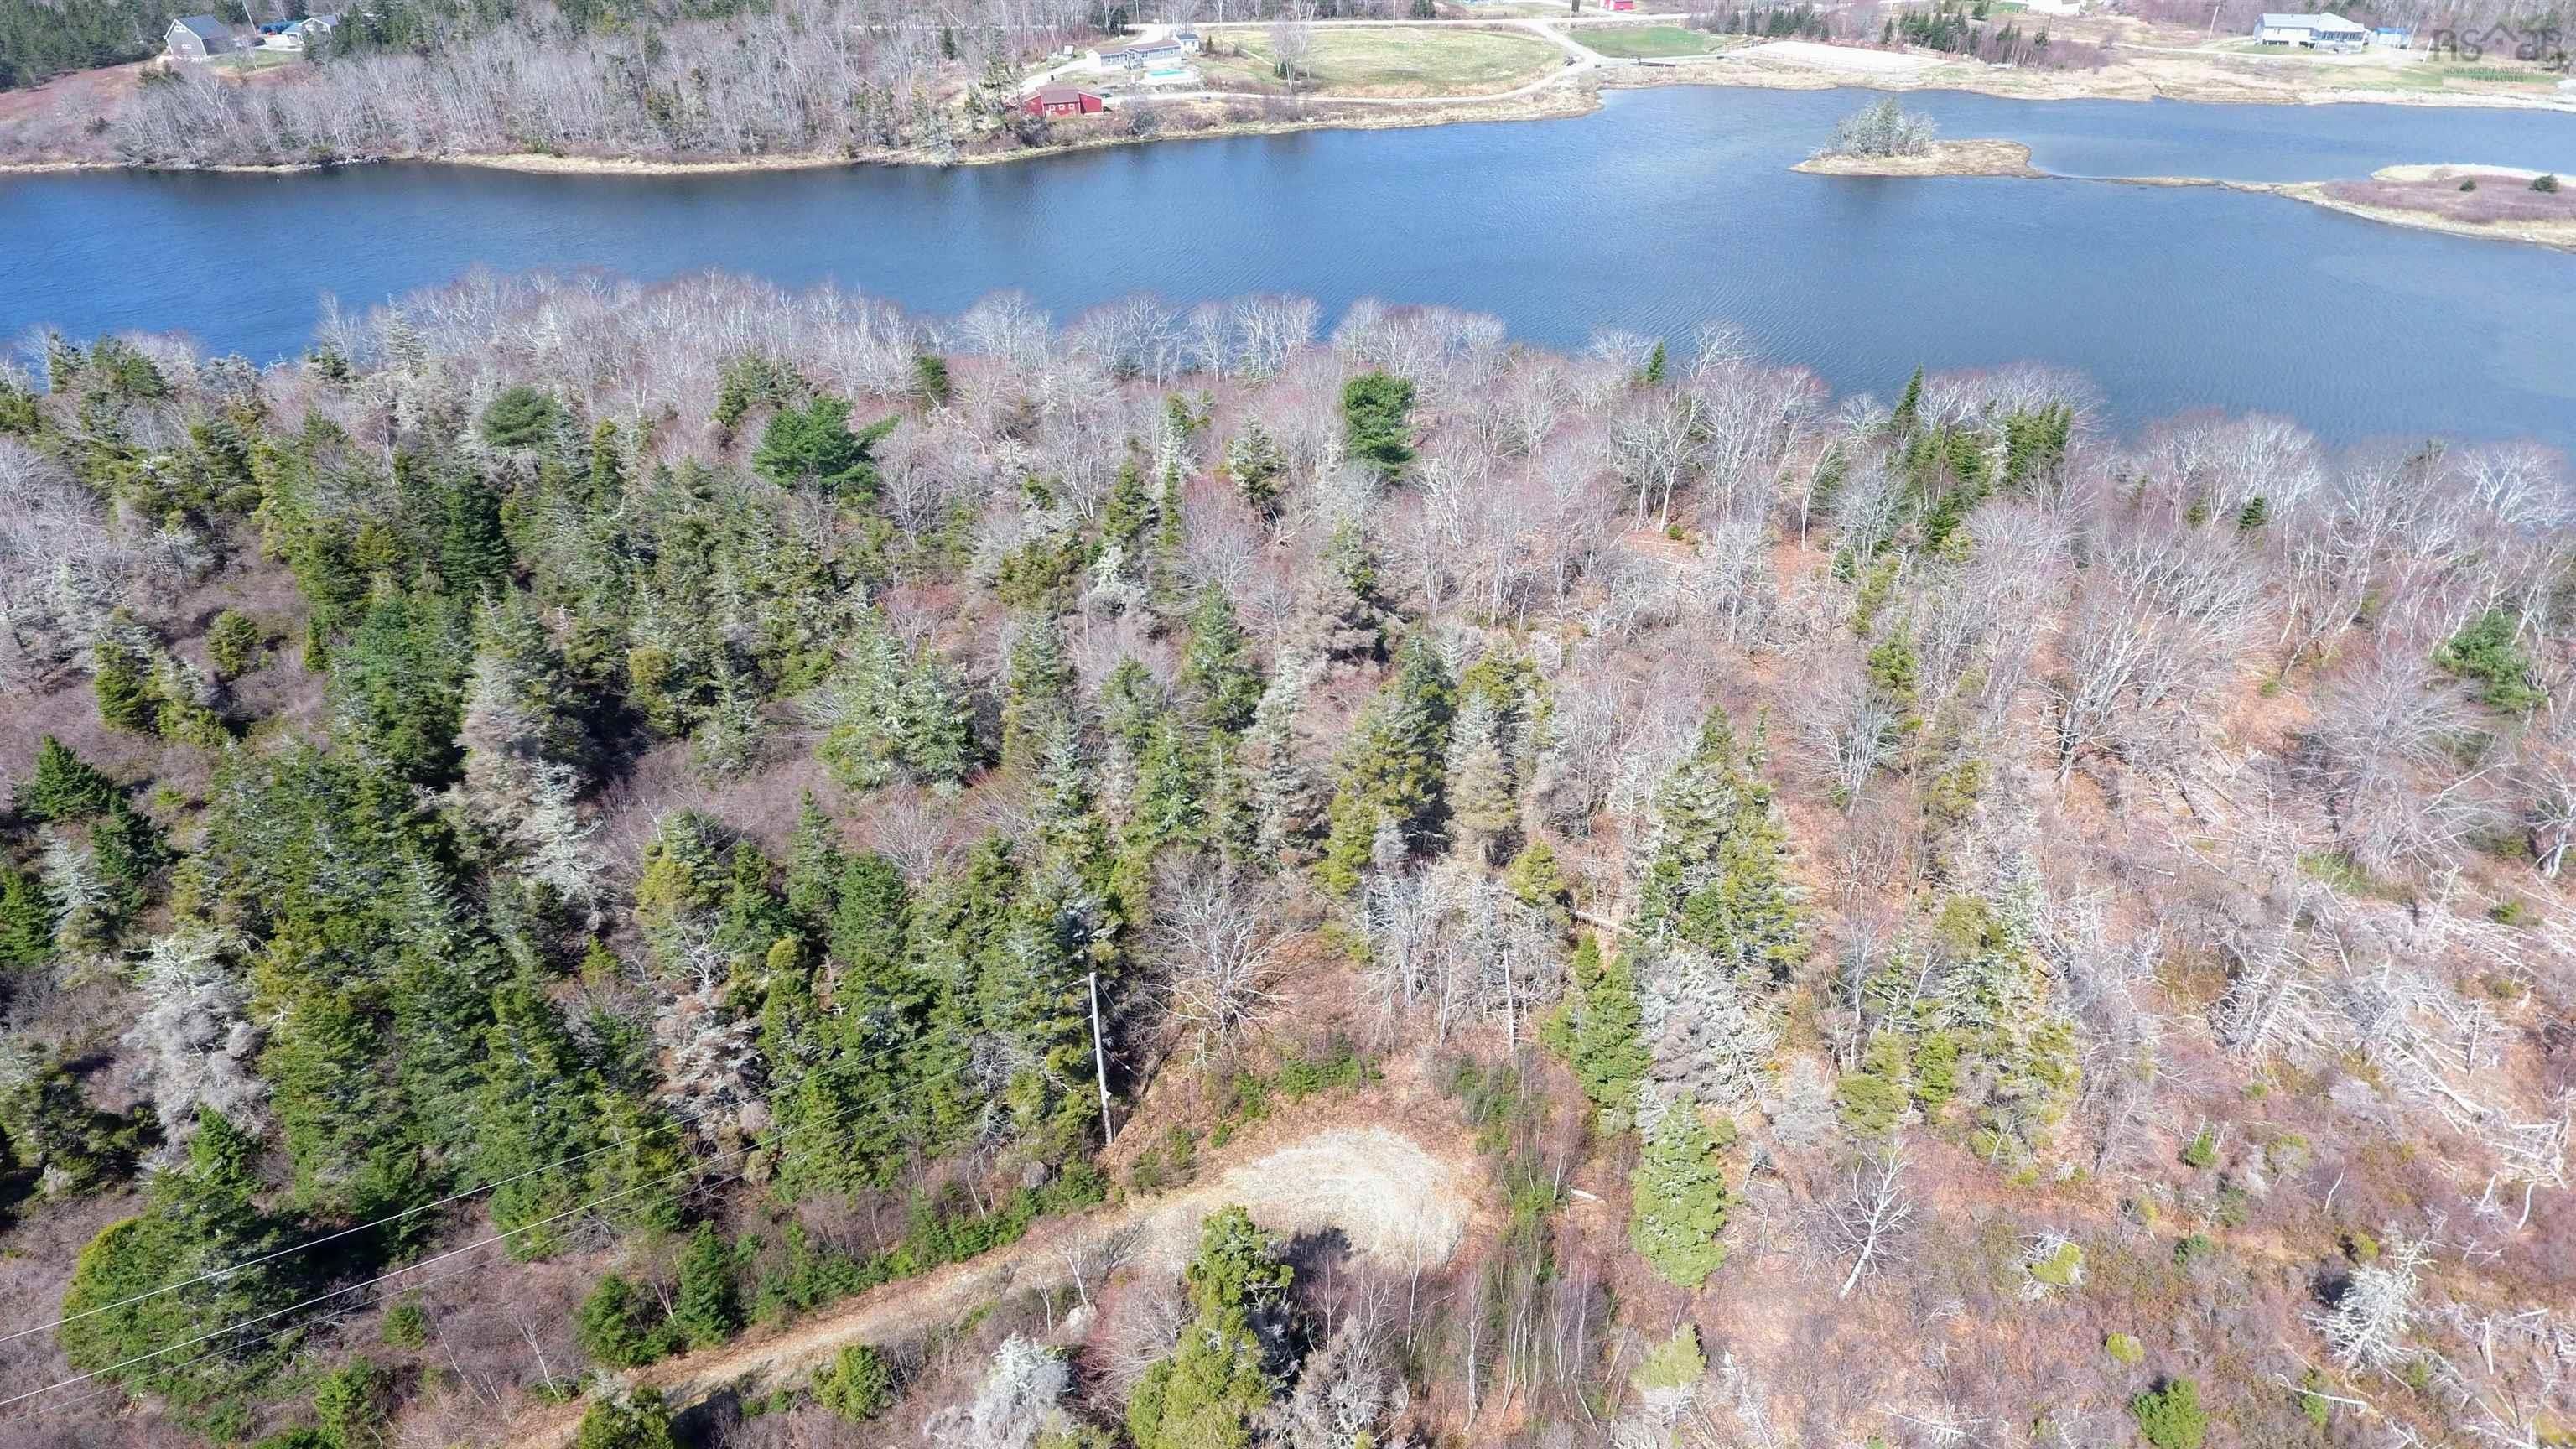 Main Photo: Lot 15 MCLEANS ISLAND Road in Jordan Bay: 407-Shelburne County Vacant Land for sale (South Shore)  : MLS®# 202306558